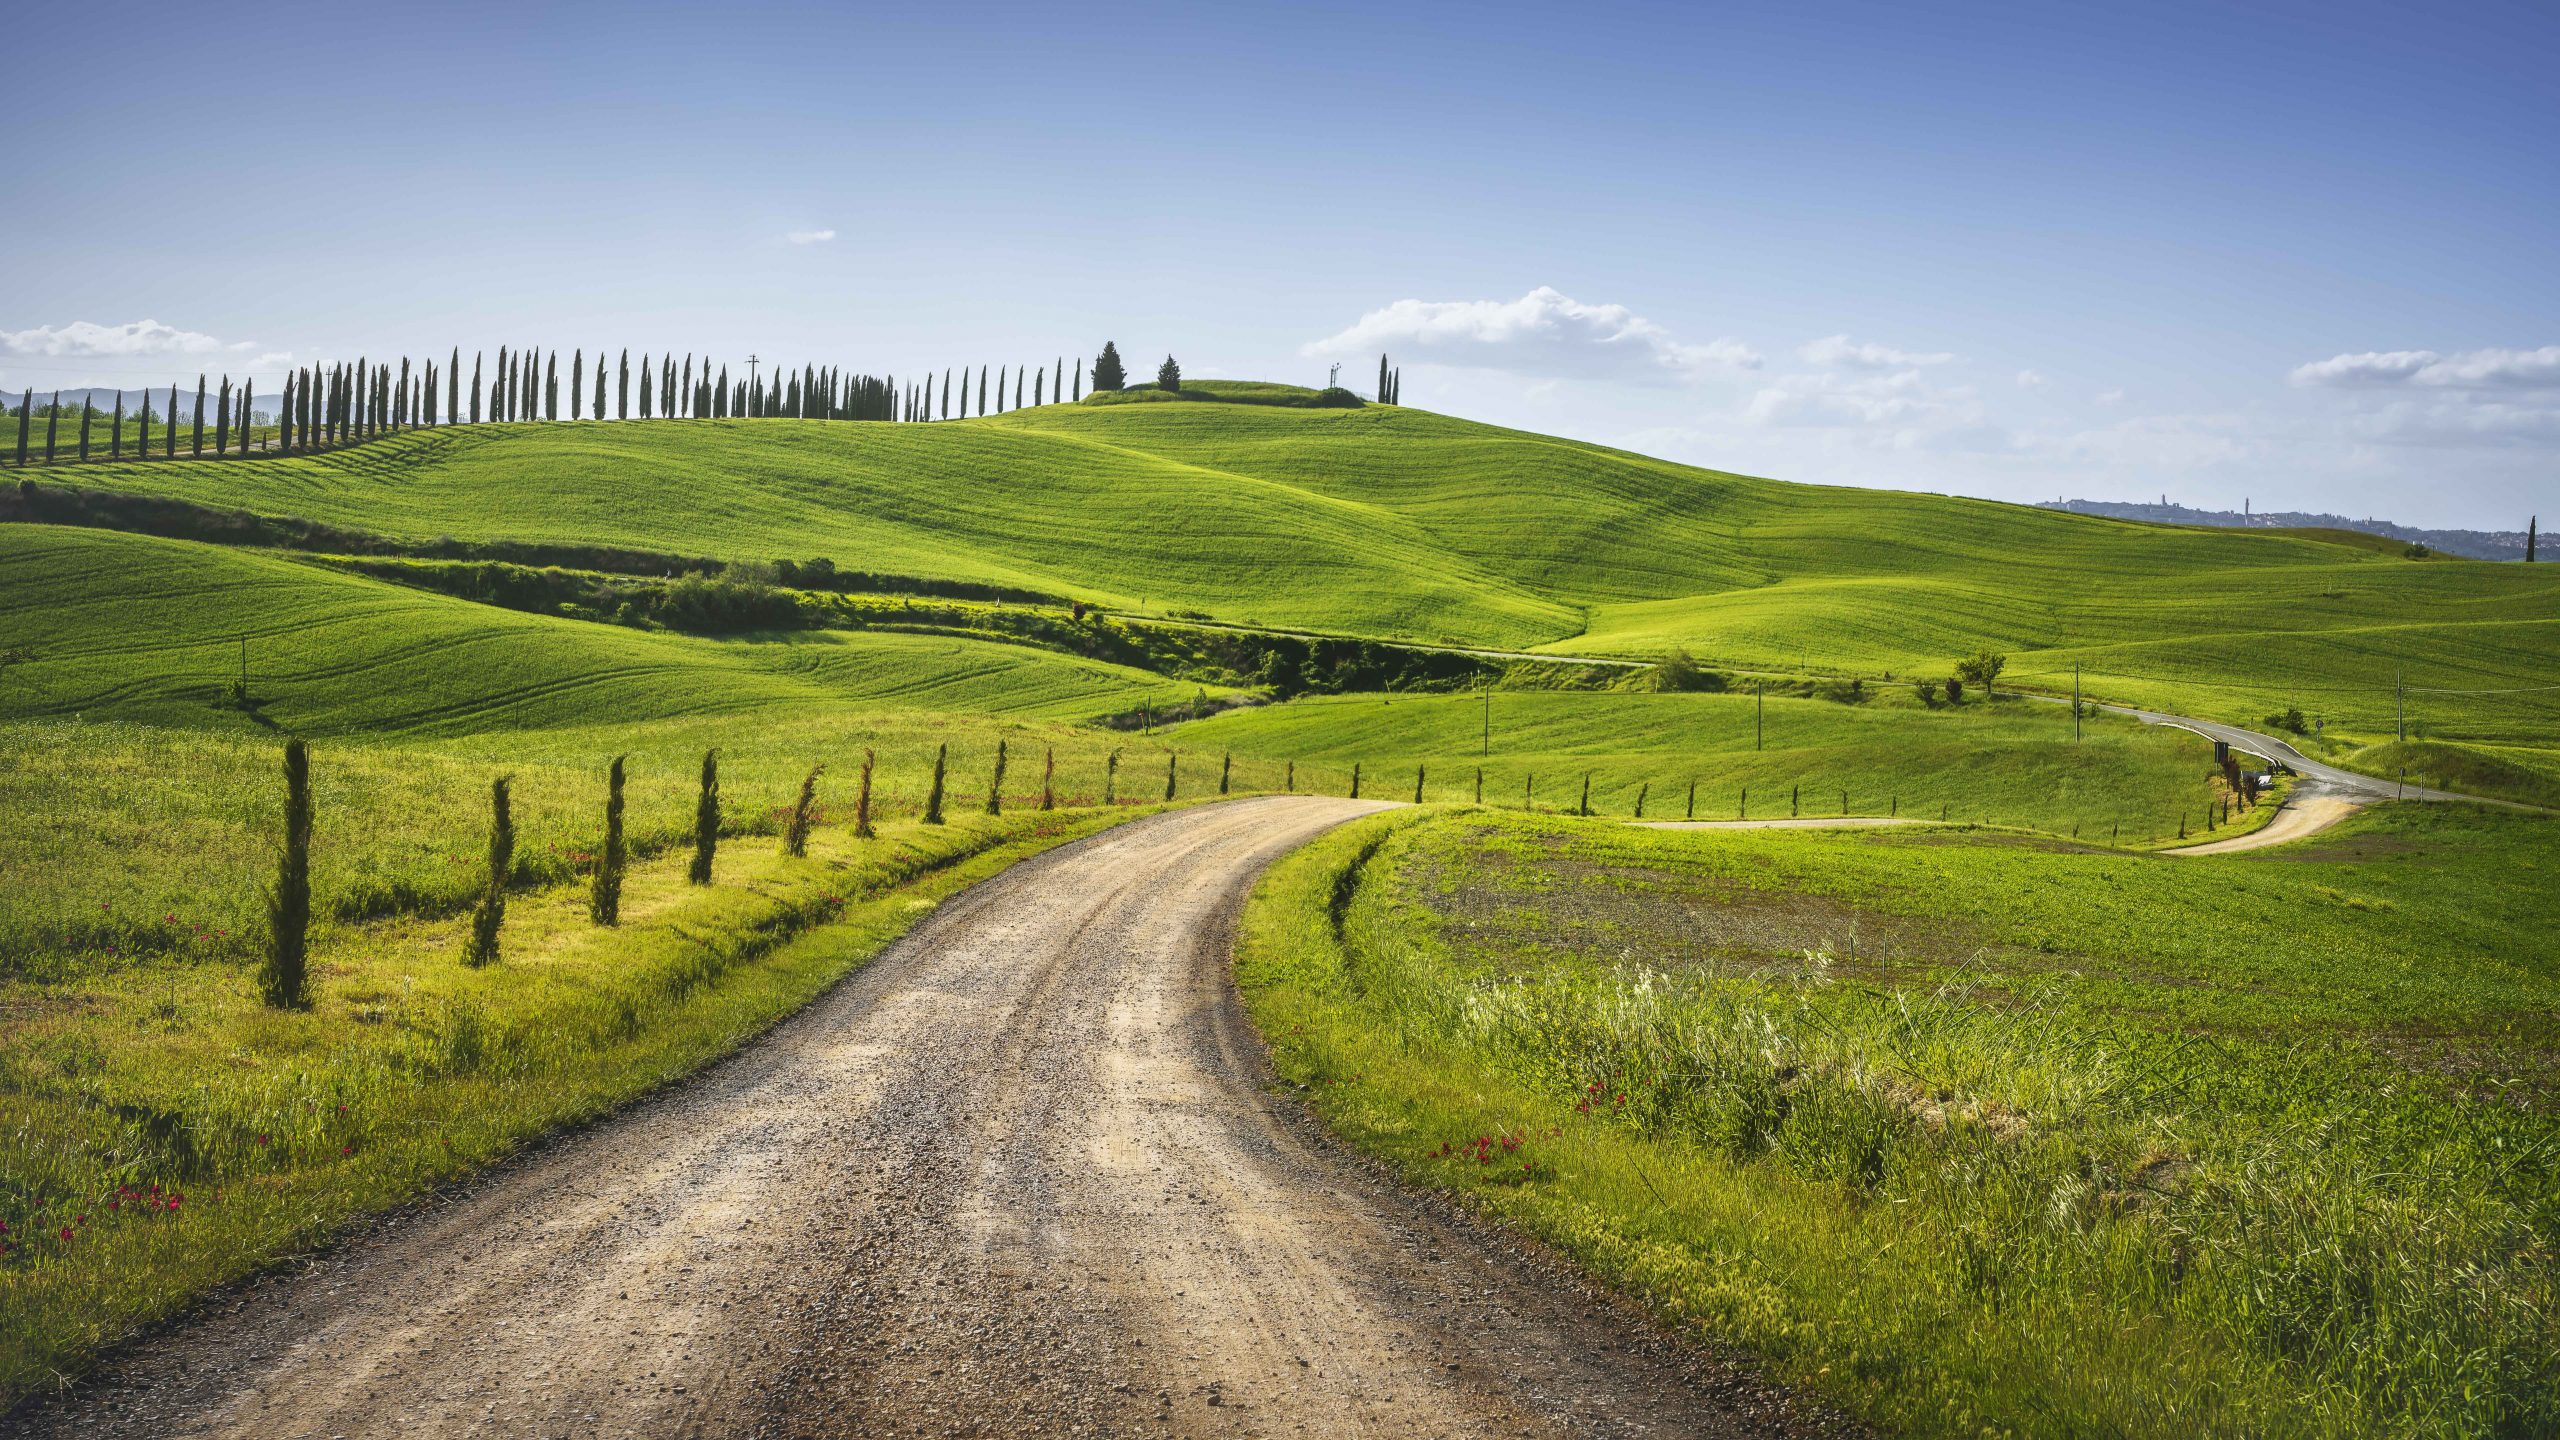 Monteroni d'Arbia, route of the via francigena. Curved road, Field and trees. Siena on background, Tuscany. Italy, Europe.